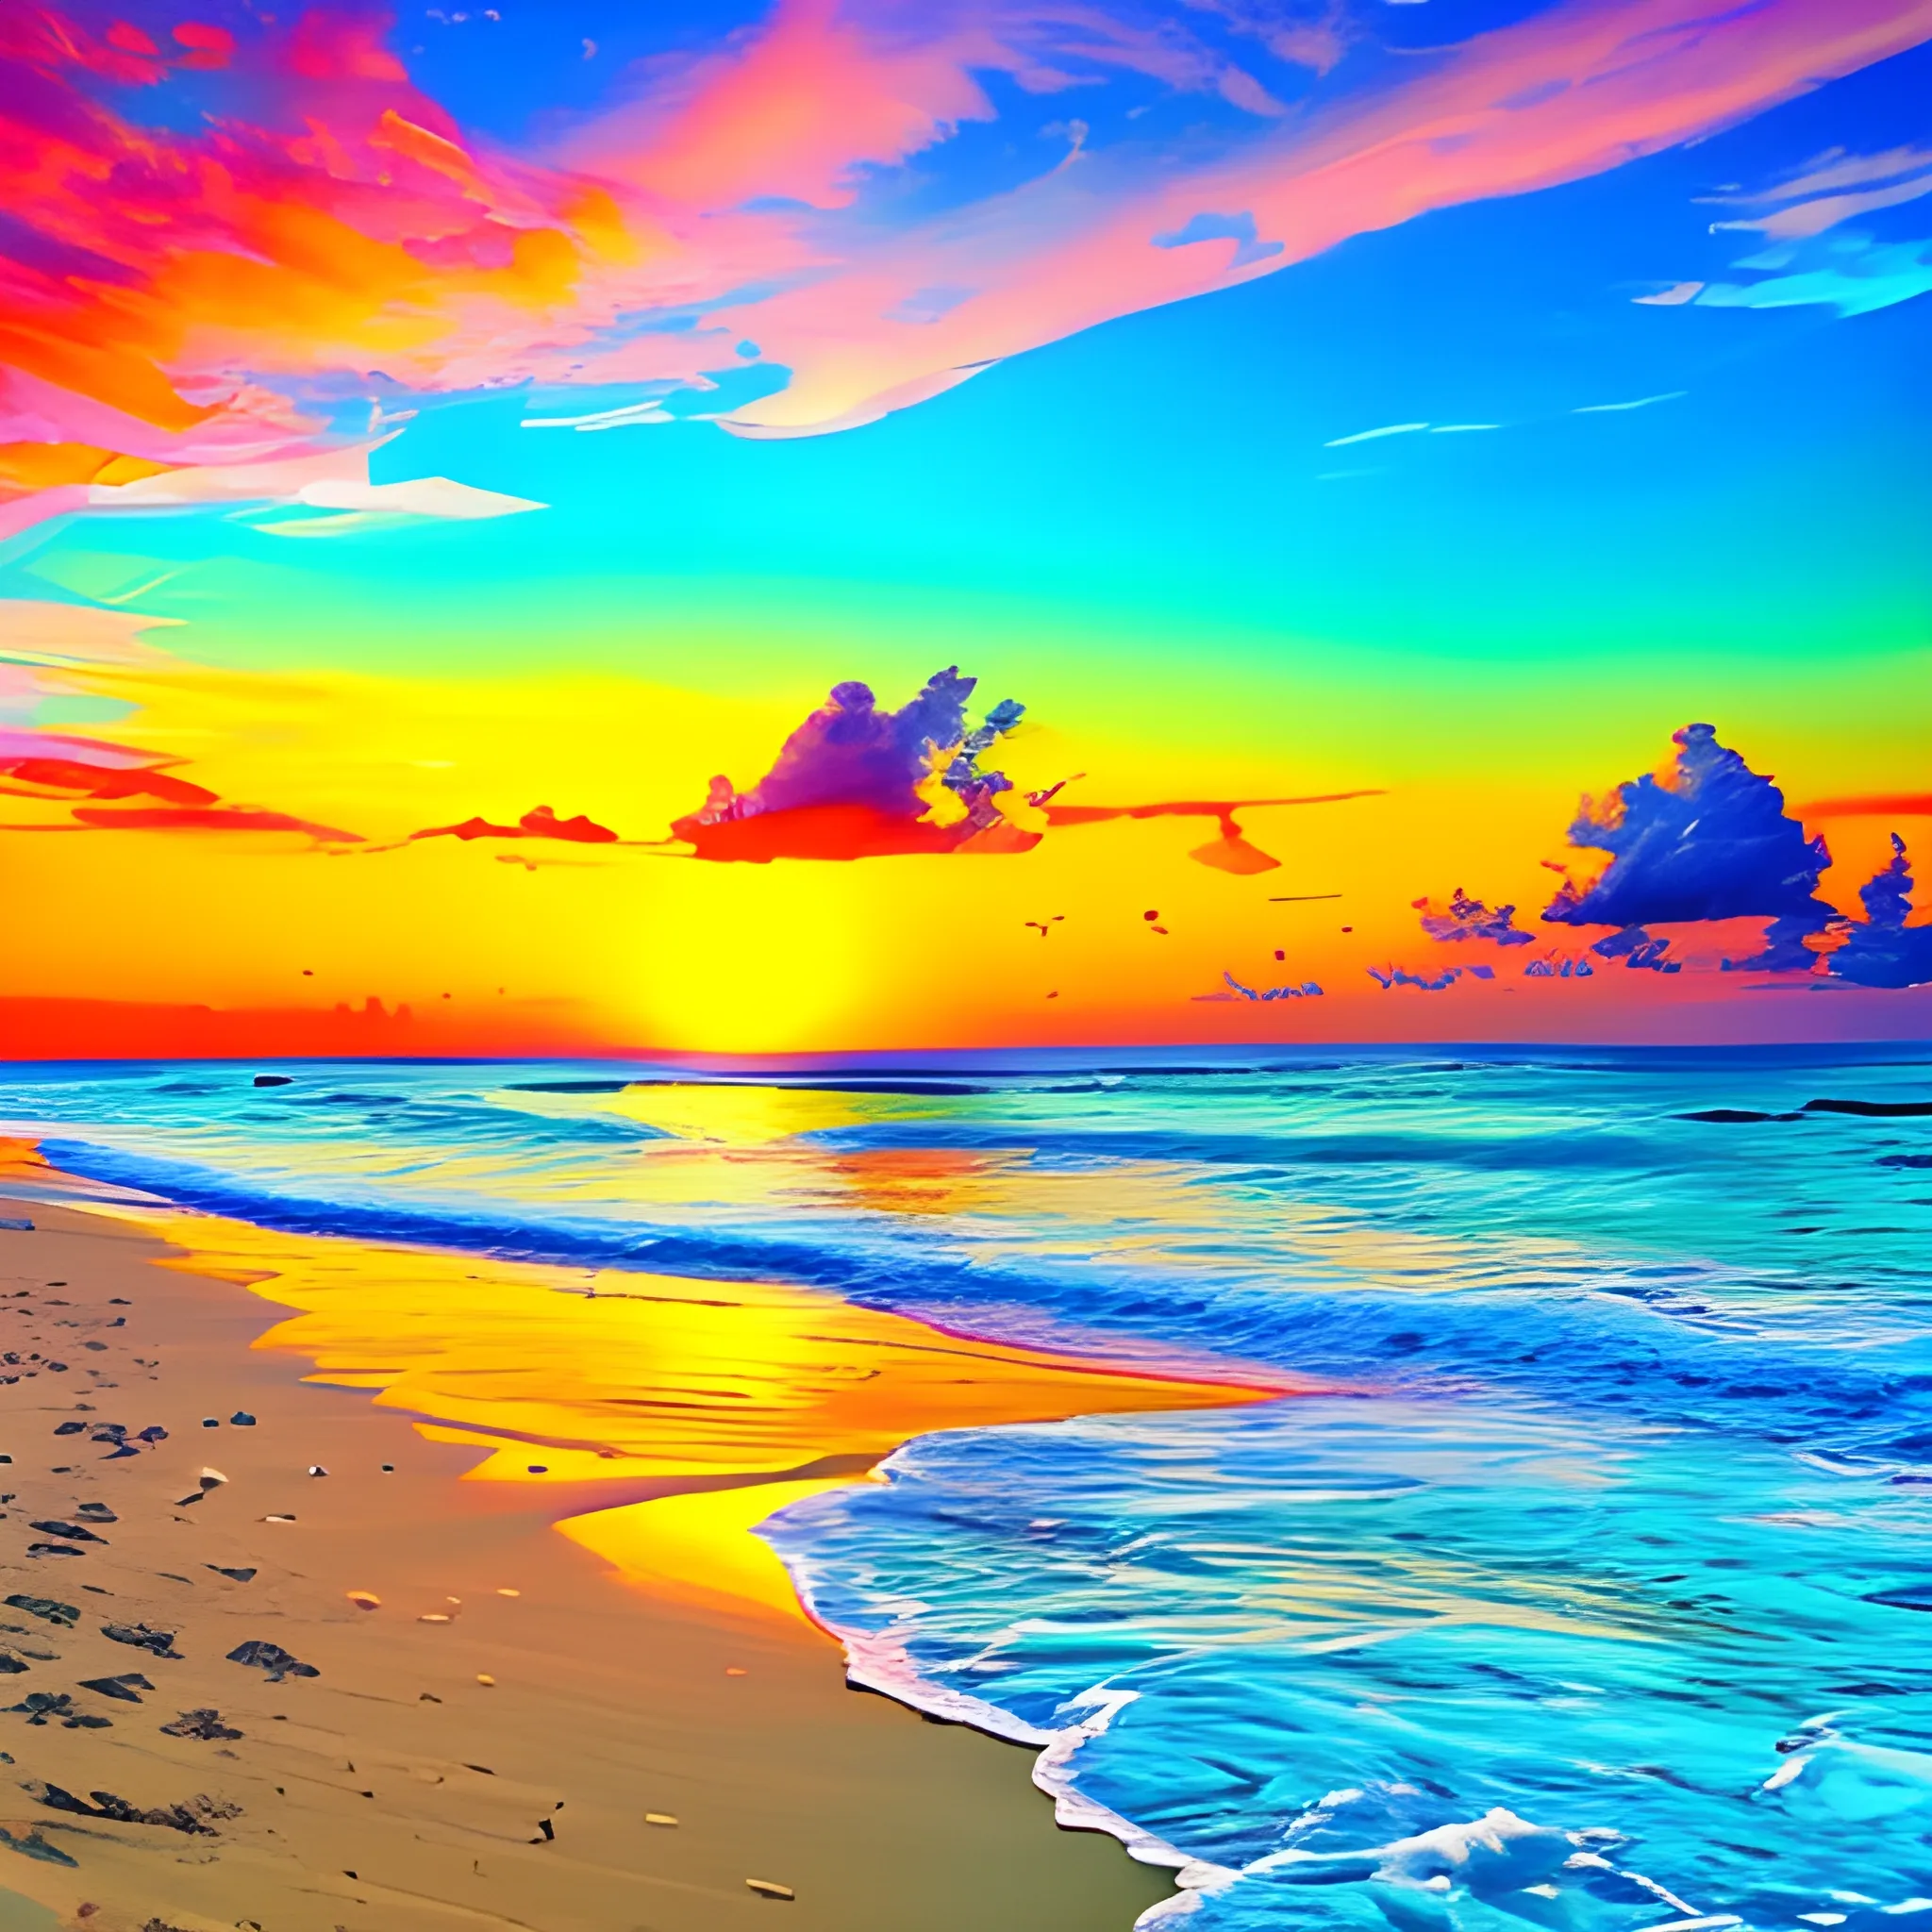 the tropical beach, the sea, the sunset and the colourful clouds in the sky